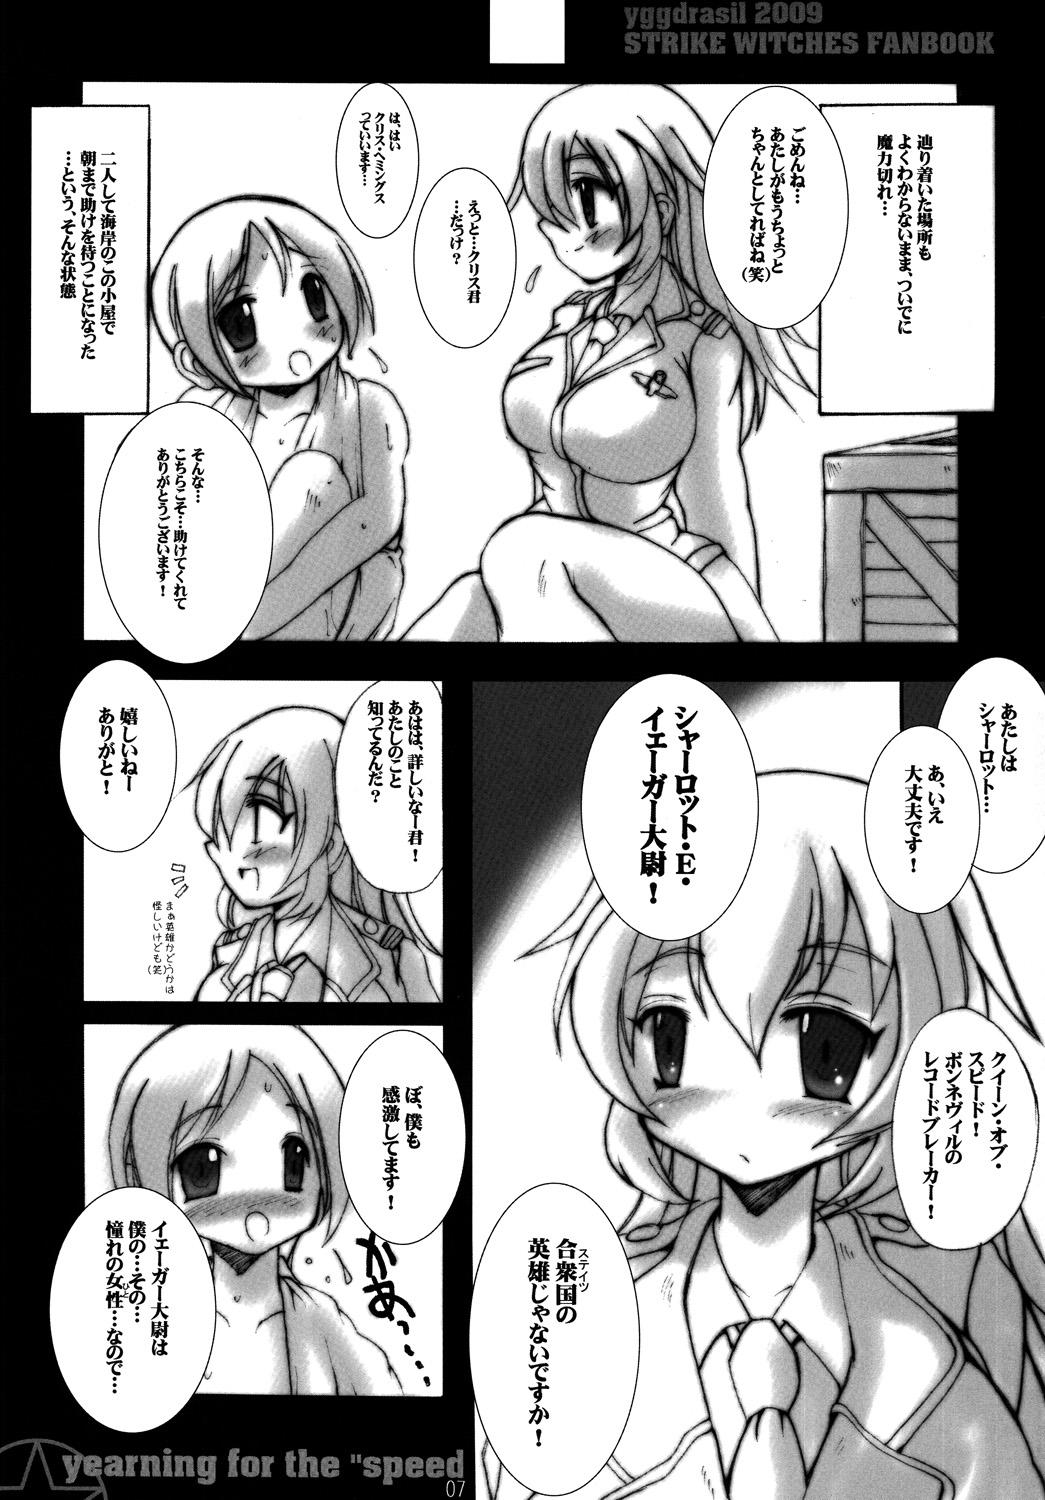 Novinho yearning for the “speed” - Strike witches Super - Page 6